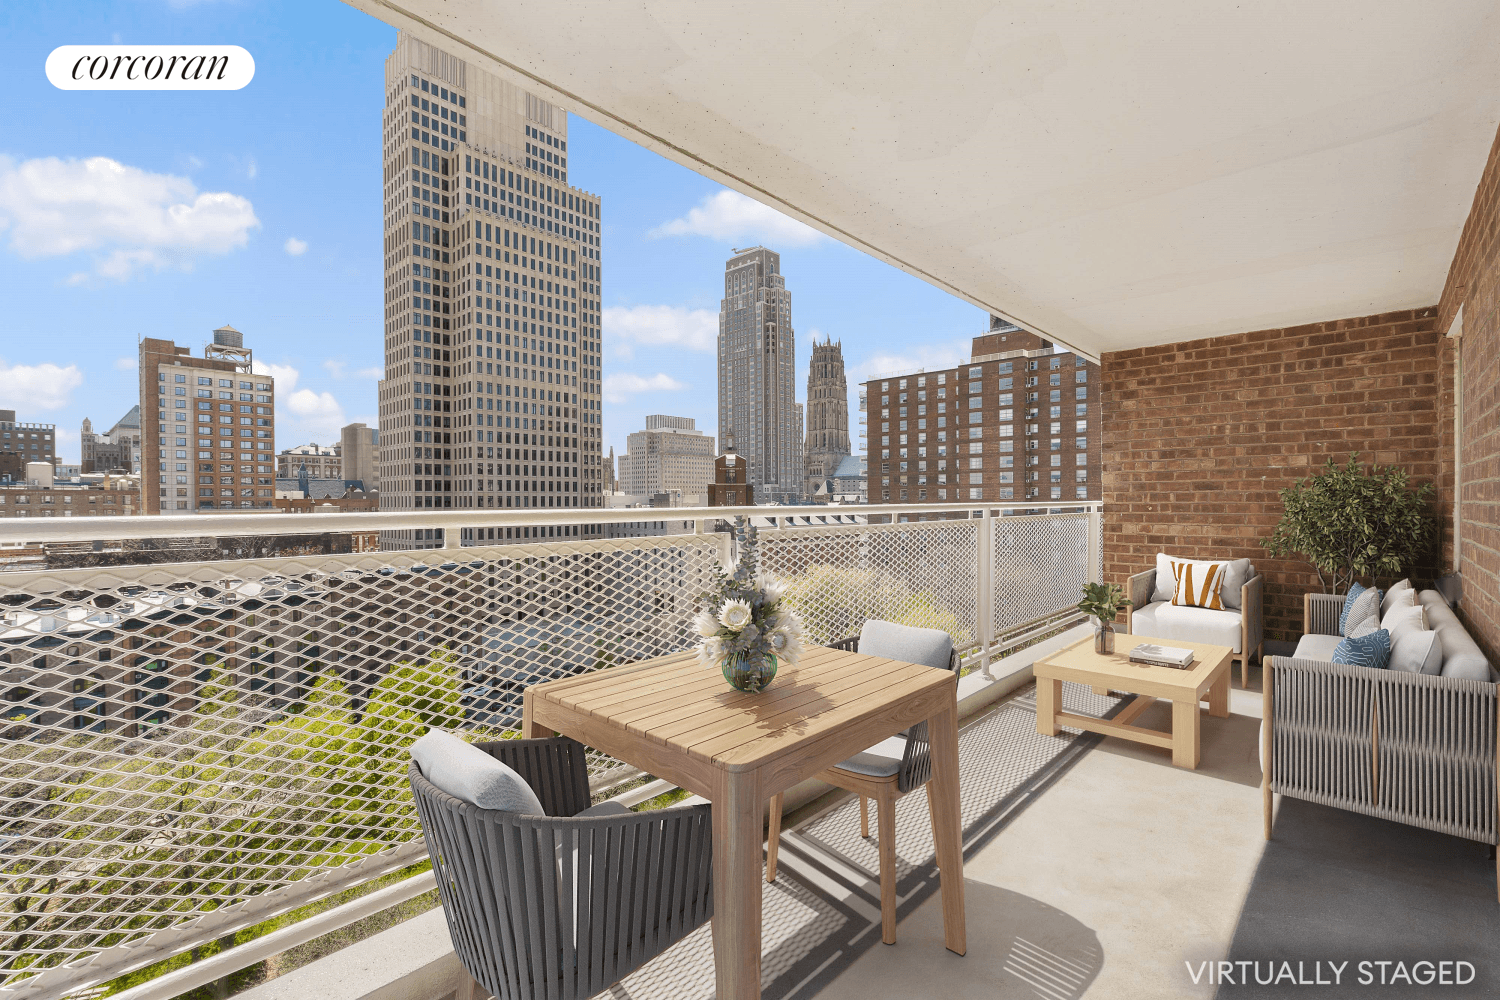 NOW AVAILABLE RARE FIND THREE BEDROOM TWO FULL BATHS WITH PRIVATE TERRACE IN MORNINGSIDE GARDENS This high floor and sun drenched home is located in an oasis of Morningside Heights.